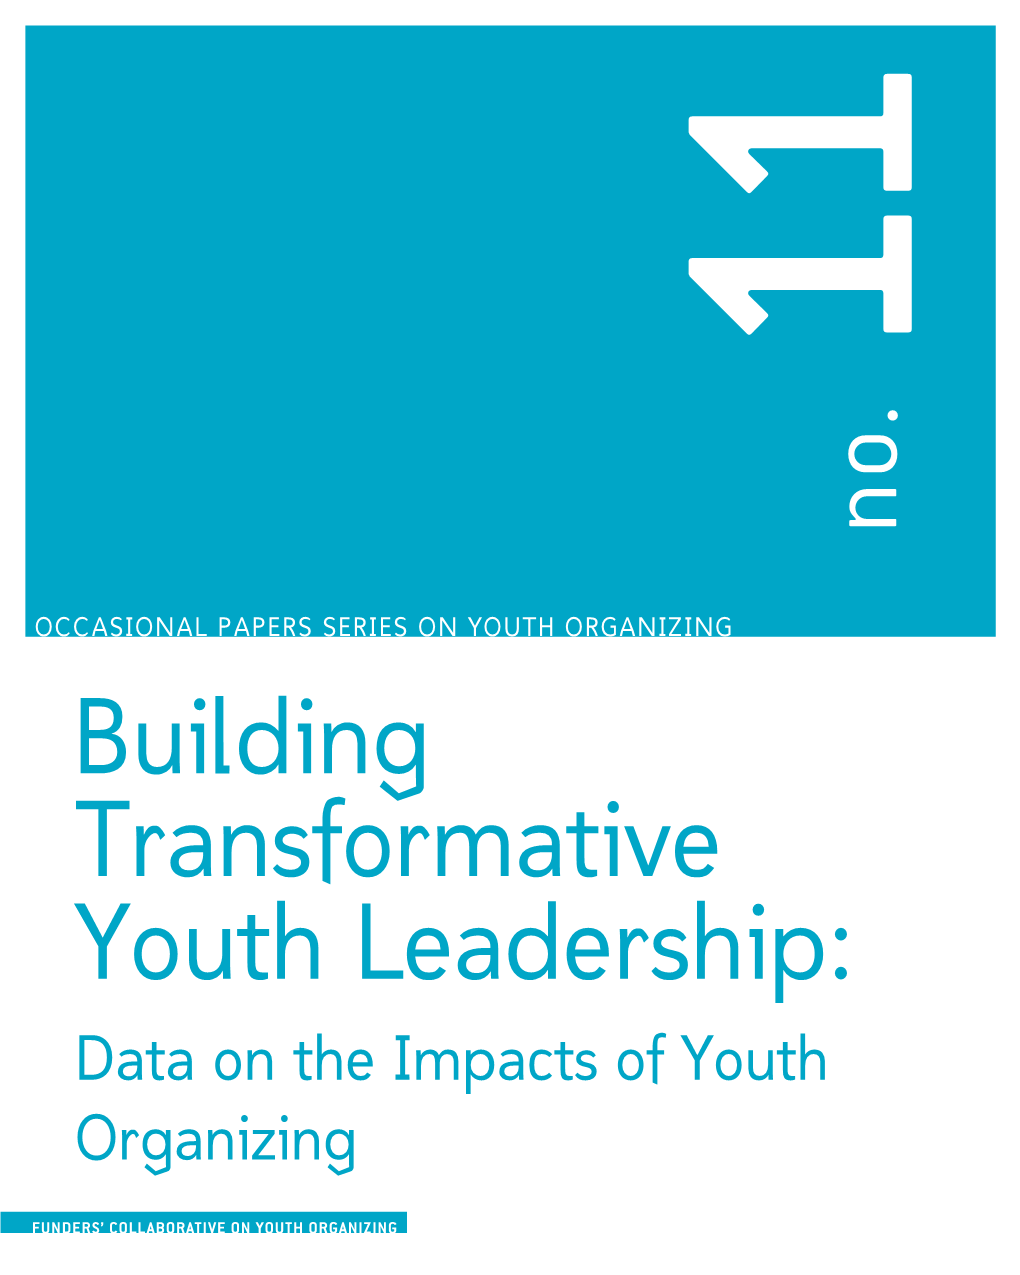 Building Transformative Youth Leadership: Data on the Impacts of Youth Organizing